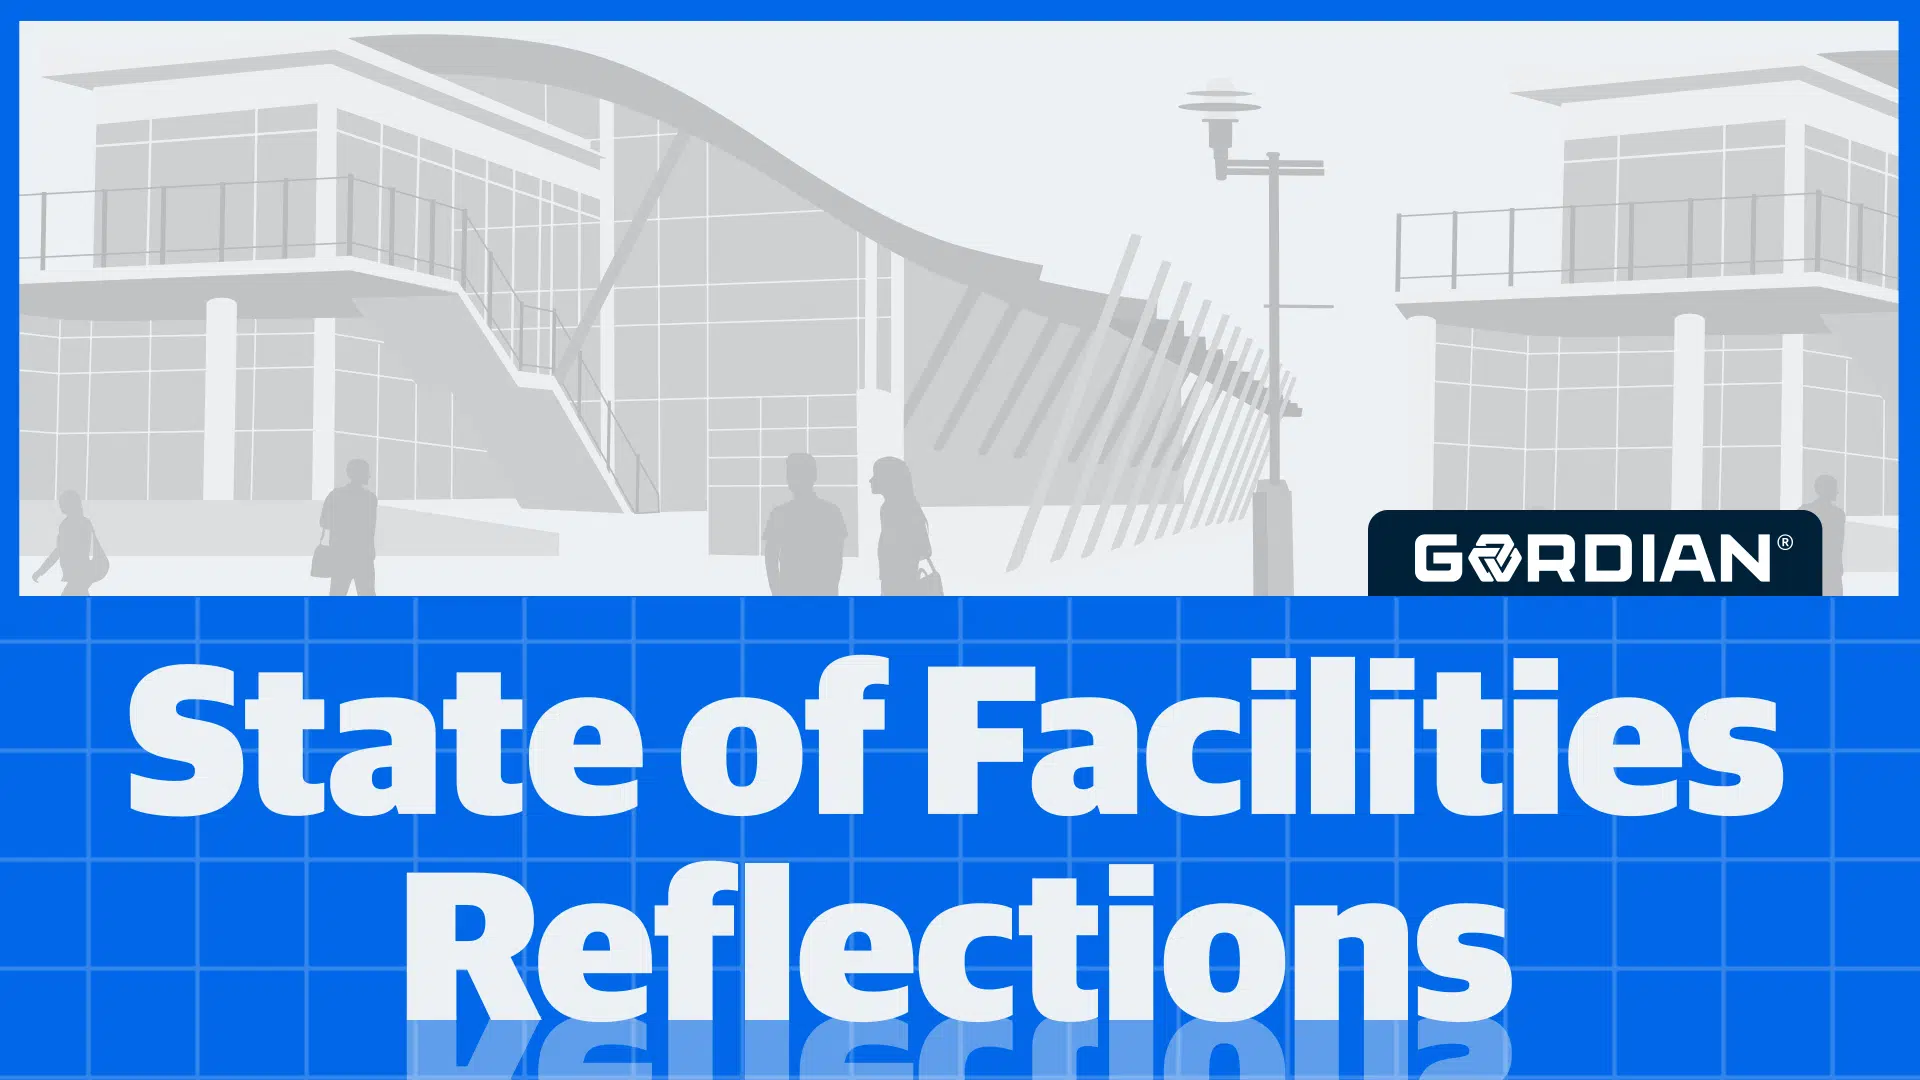 Campus Leaders Reflect on the State of Facilities 3